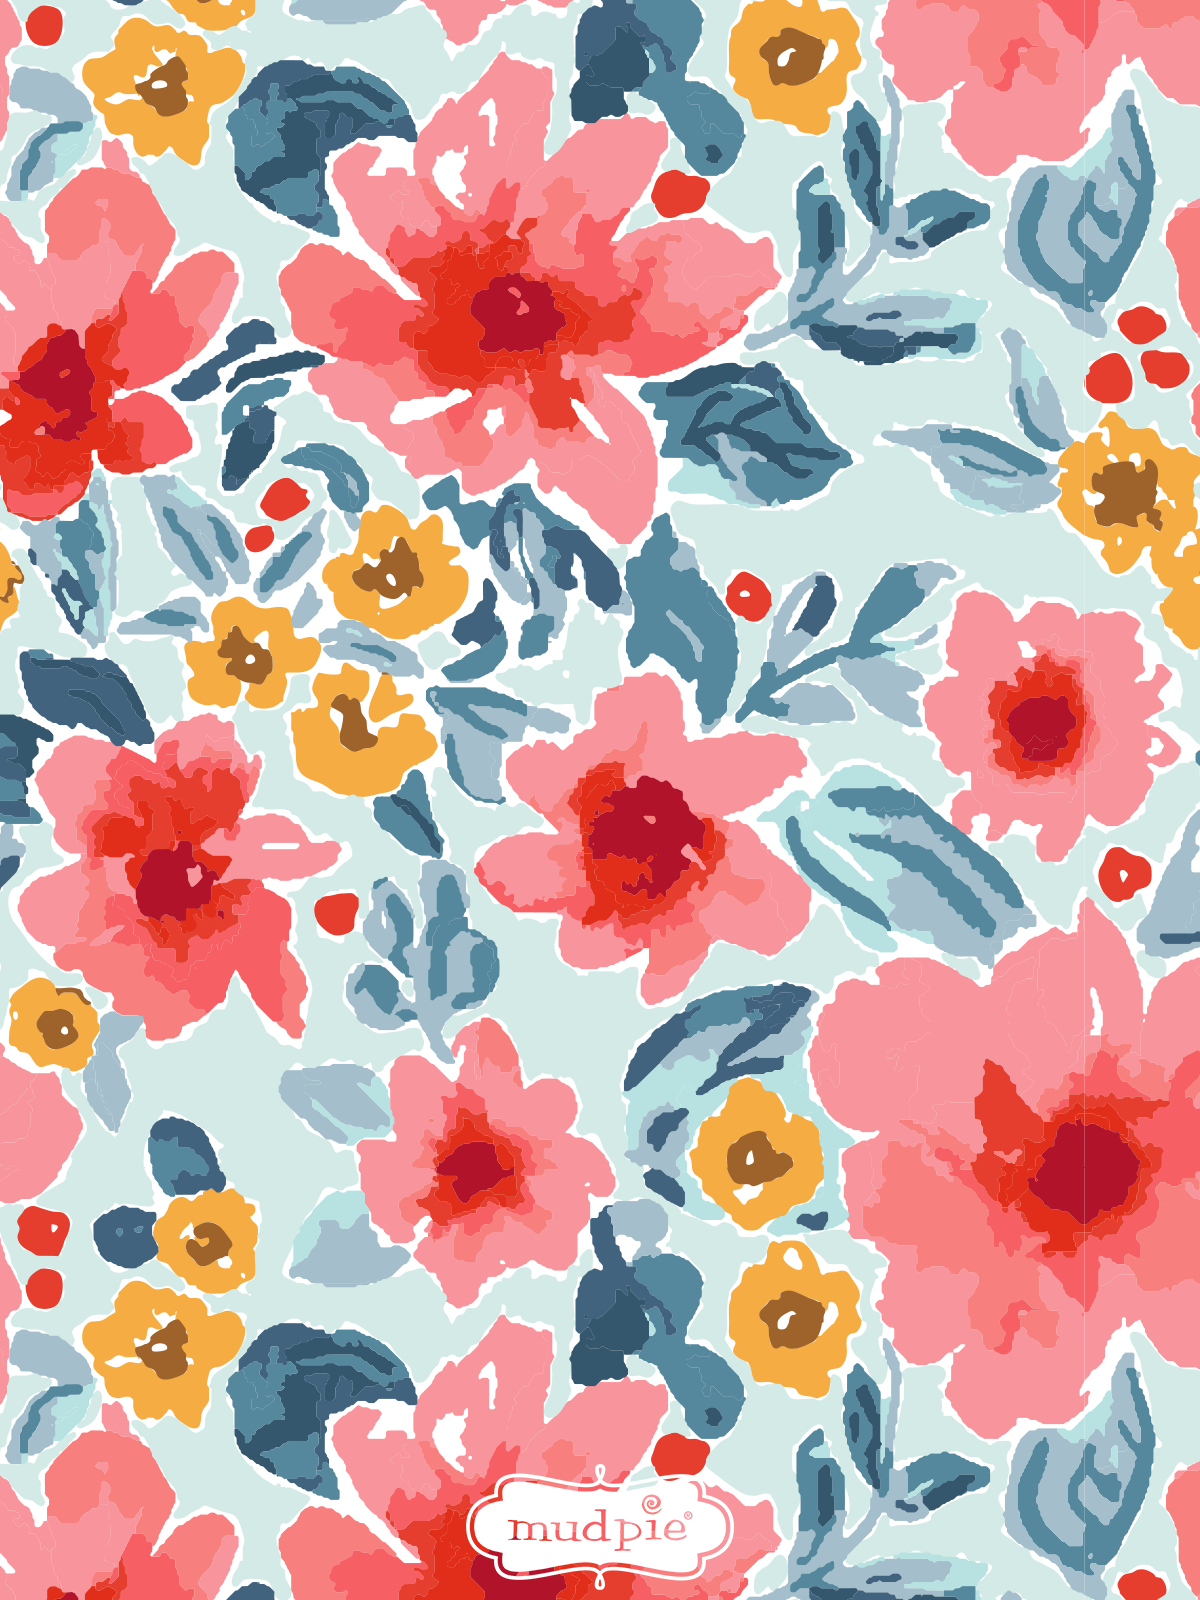 Bright Floral Print. Phone background patterns, Floral prints, Watercolor floral print